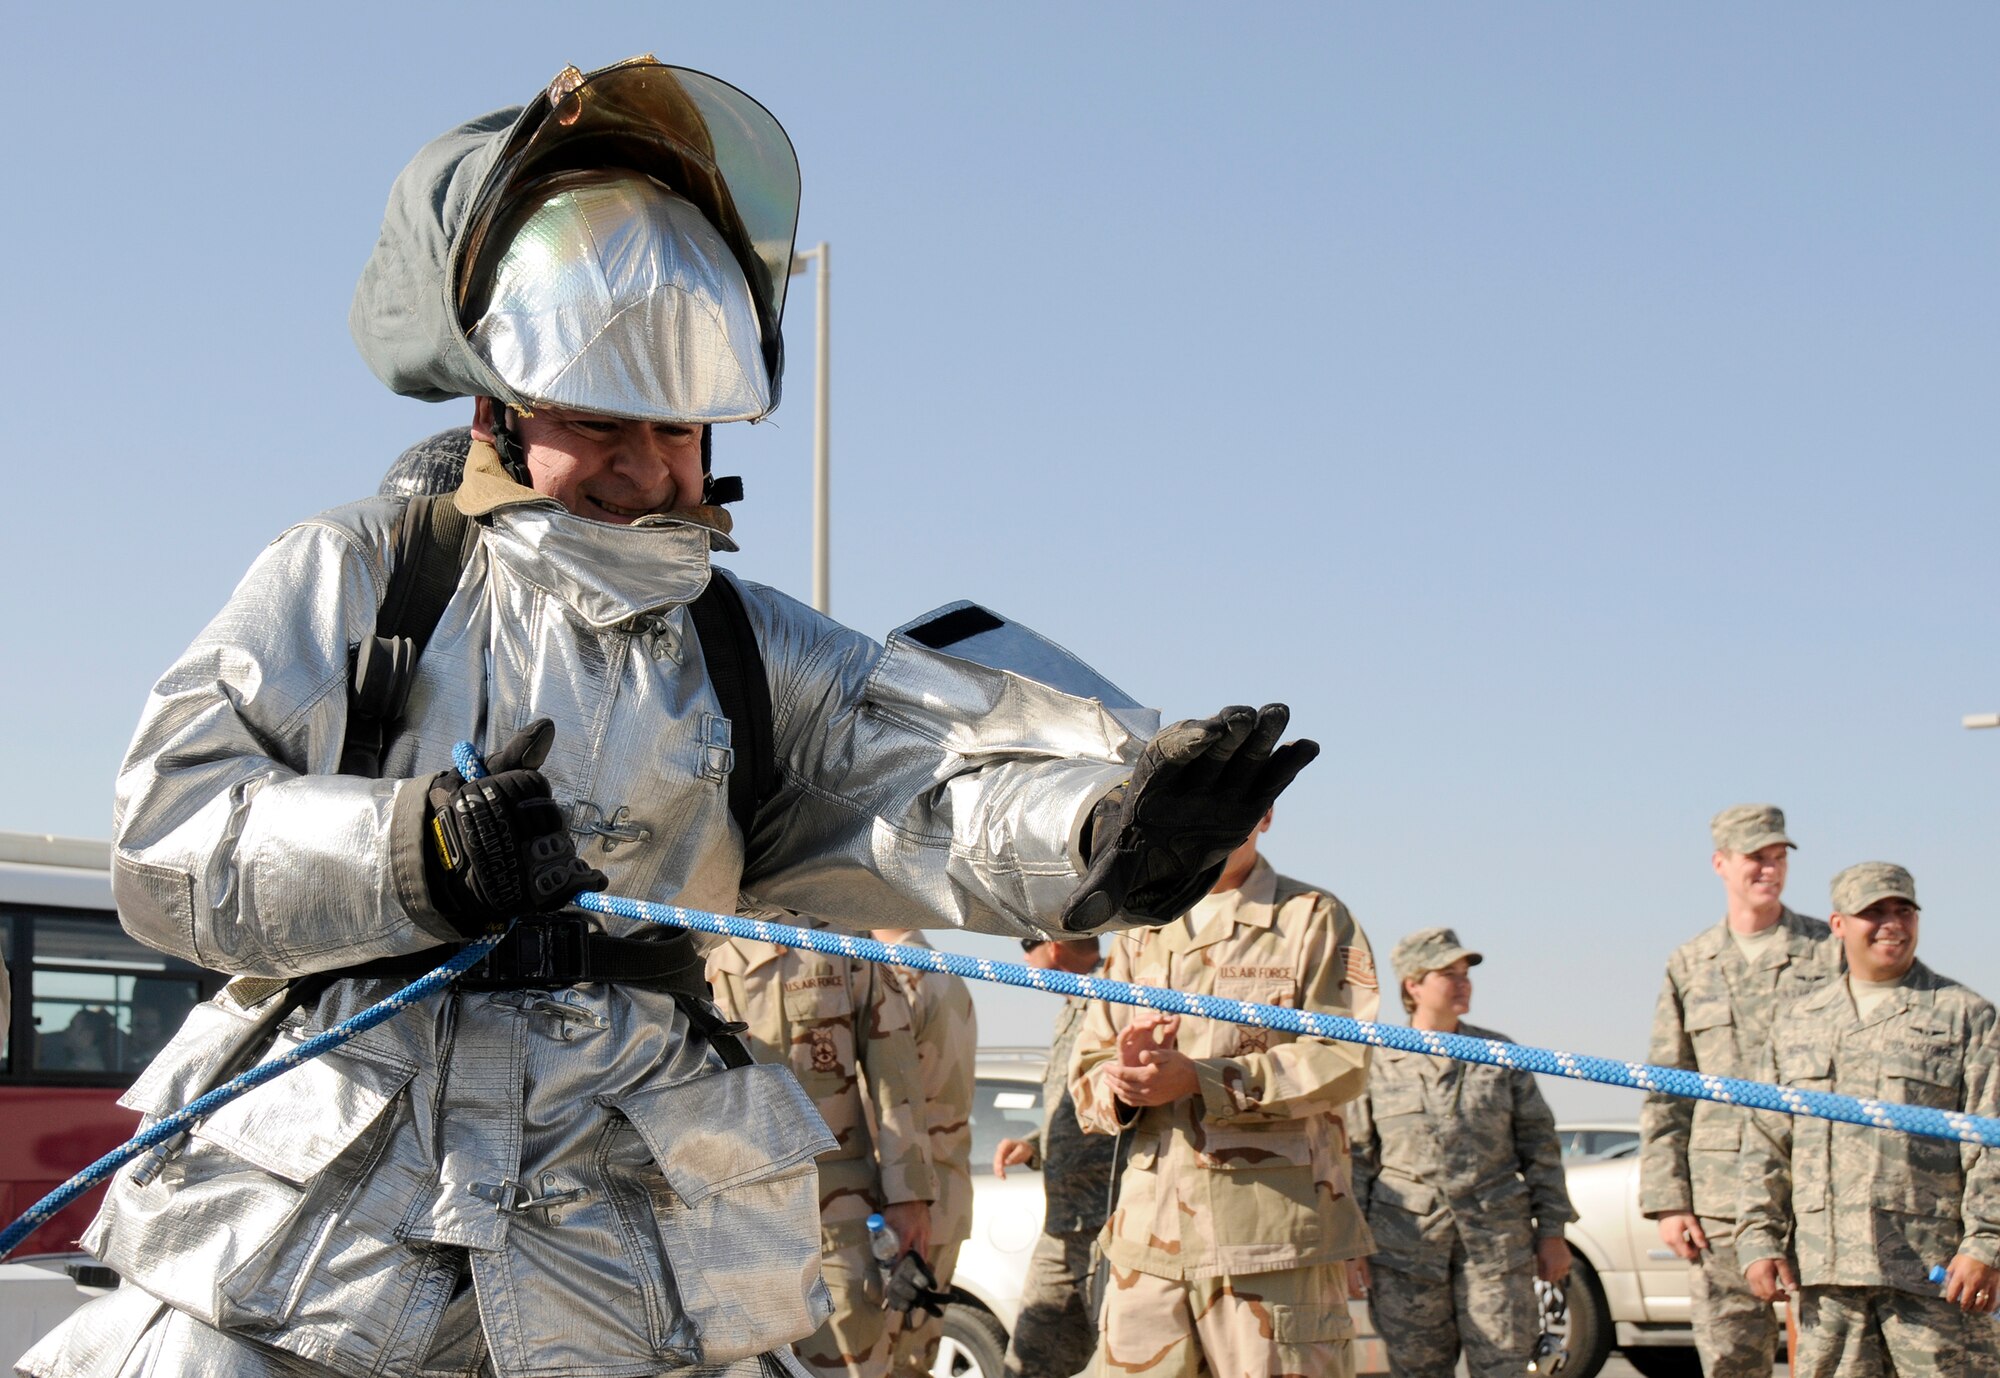 SOUTHWEST ASIA -- Col. Paul Murphy, 380th Air Expeditionary Wing vice commander, drags a 5-inch diameter, 50-foot hose over 100 feet during the 380th Firefighter Challenge held Dec. 20 here. The Firefighter Challenge gave Airmen the opportunity to don firefighter gear and be timed while performing various physical tasks. (U.S. Air Force photo/Tech. Sgt. Christopher A. Campbell)(released)